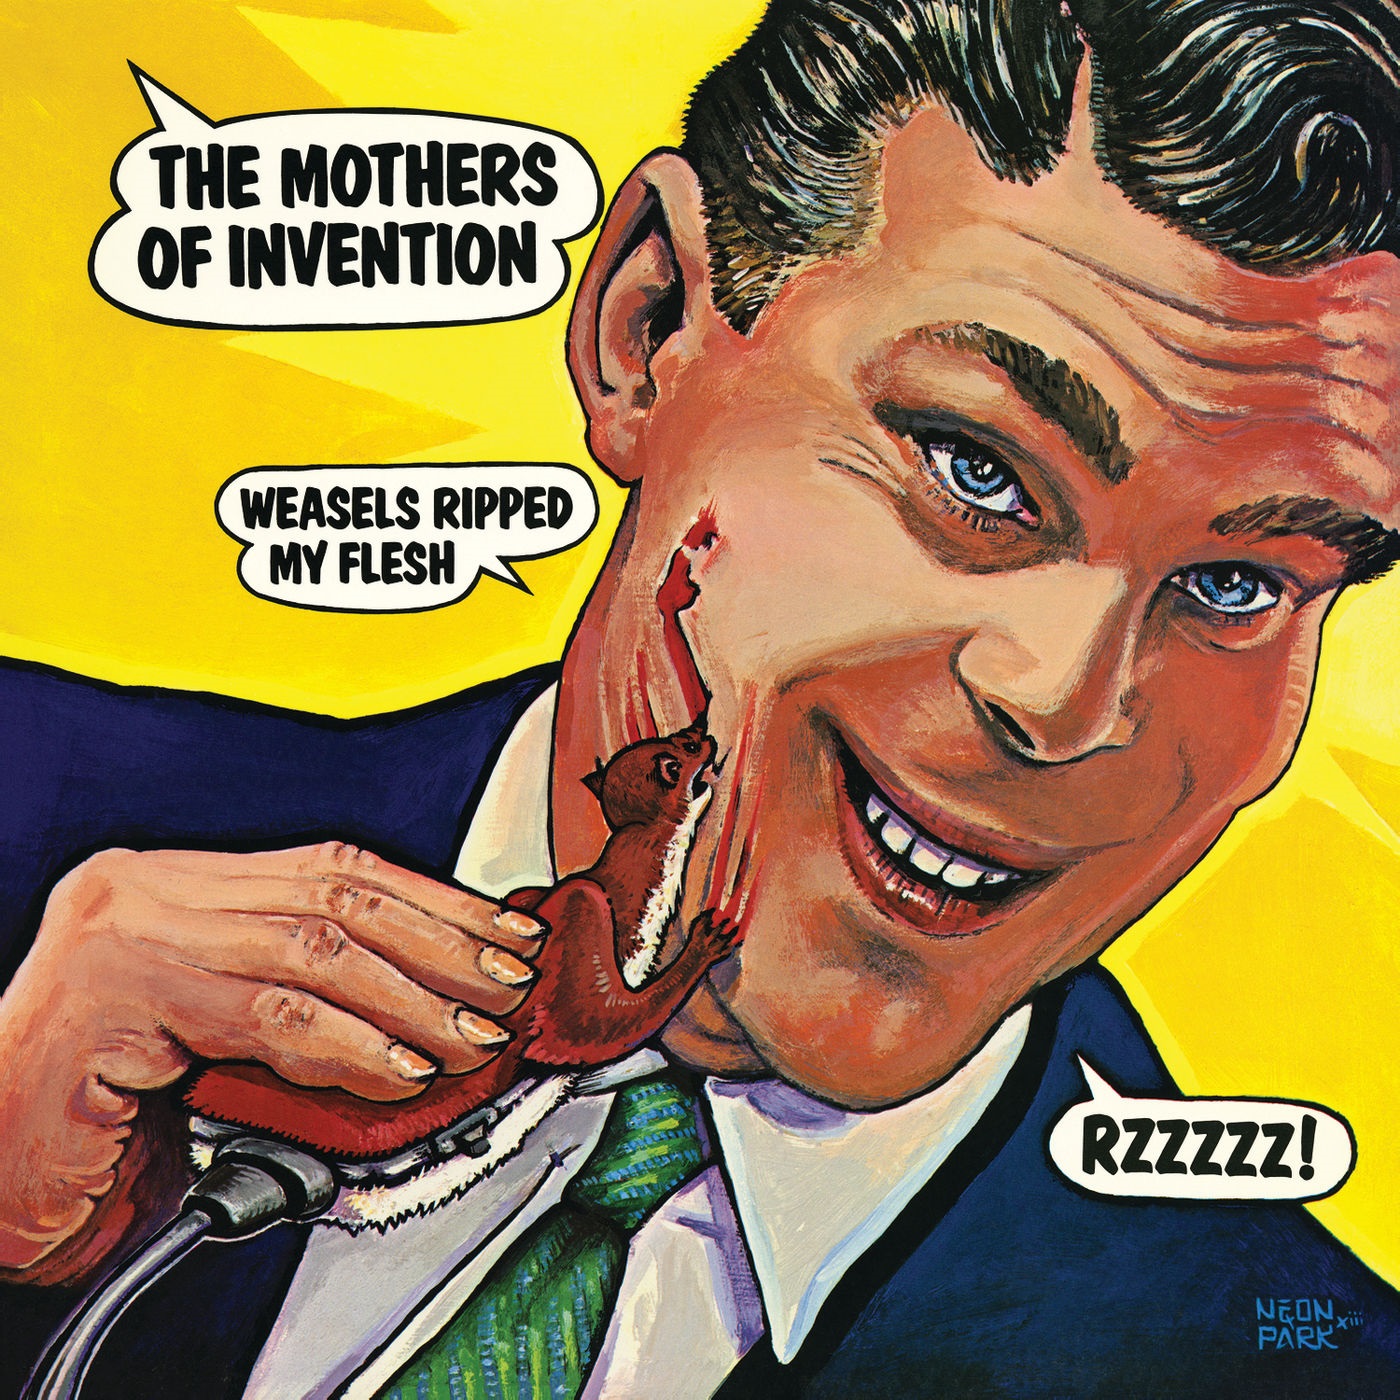 Frank Zappa & The Mothers of Invention - Weasels Ripped My Flesh (1970/2021) [FLAC 24bit/192kHz]